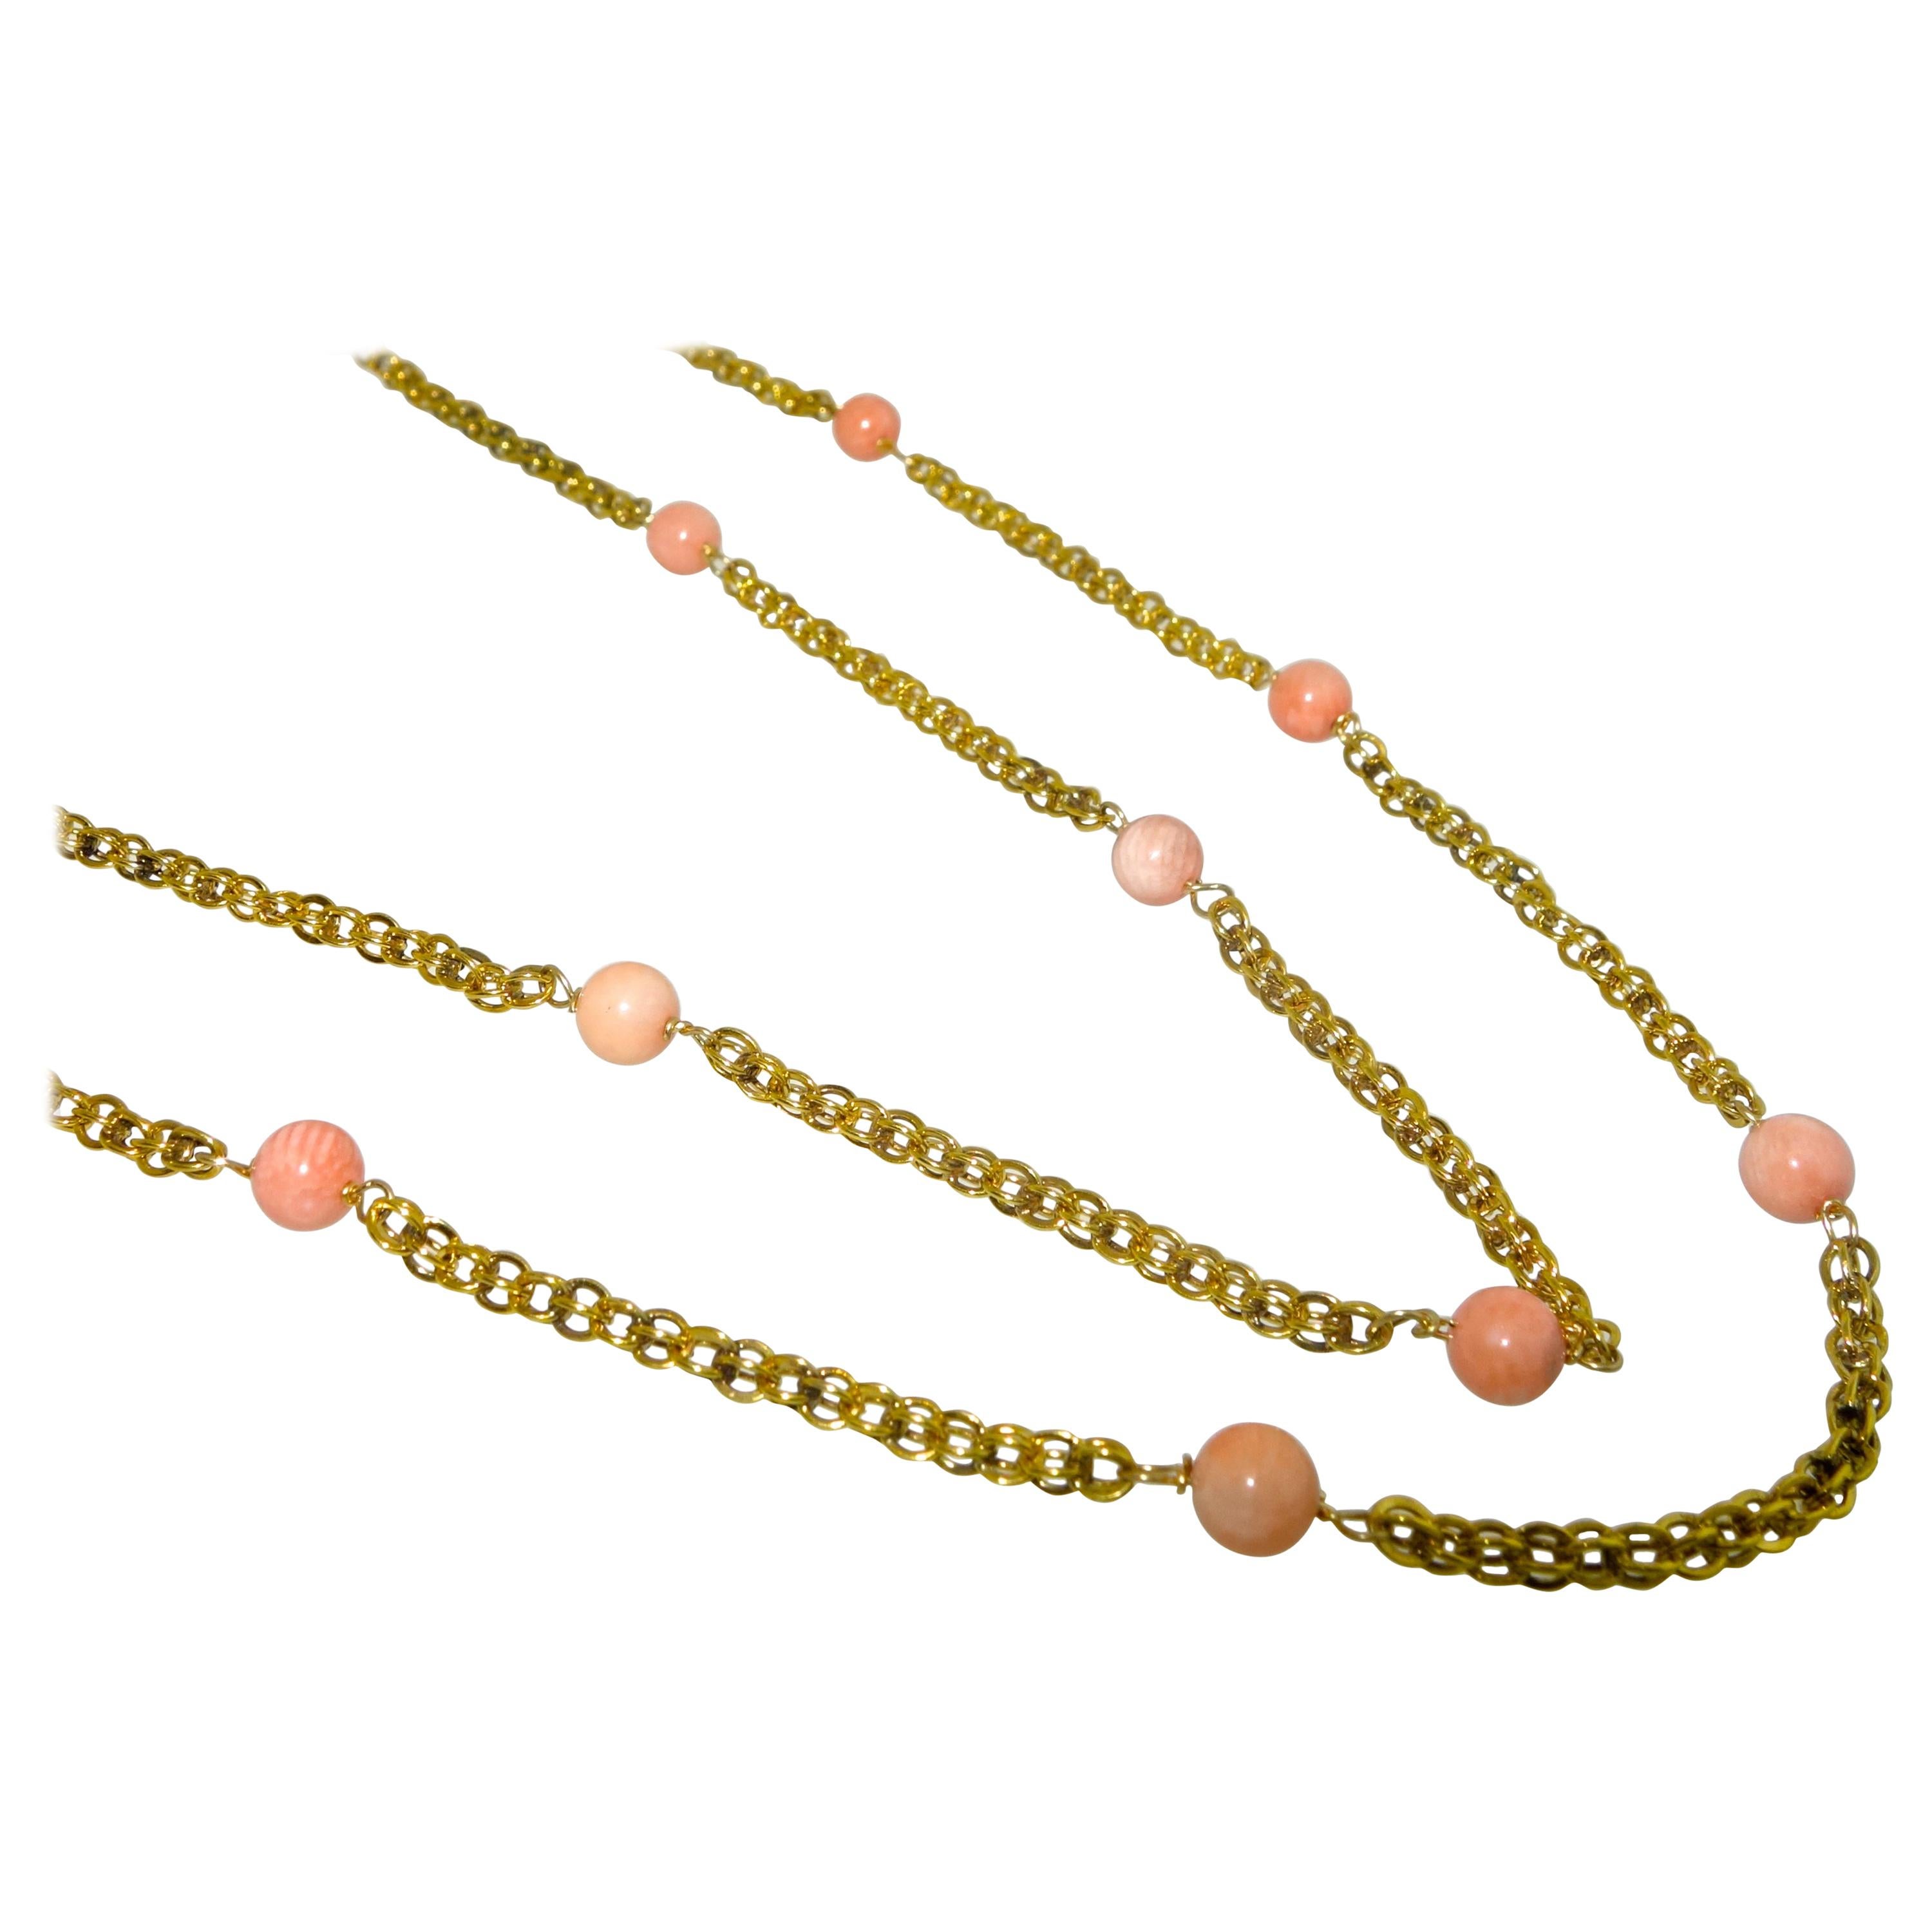 Victorian Gold Long Chain with Natural Coral Beads, circa 1890